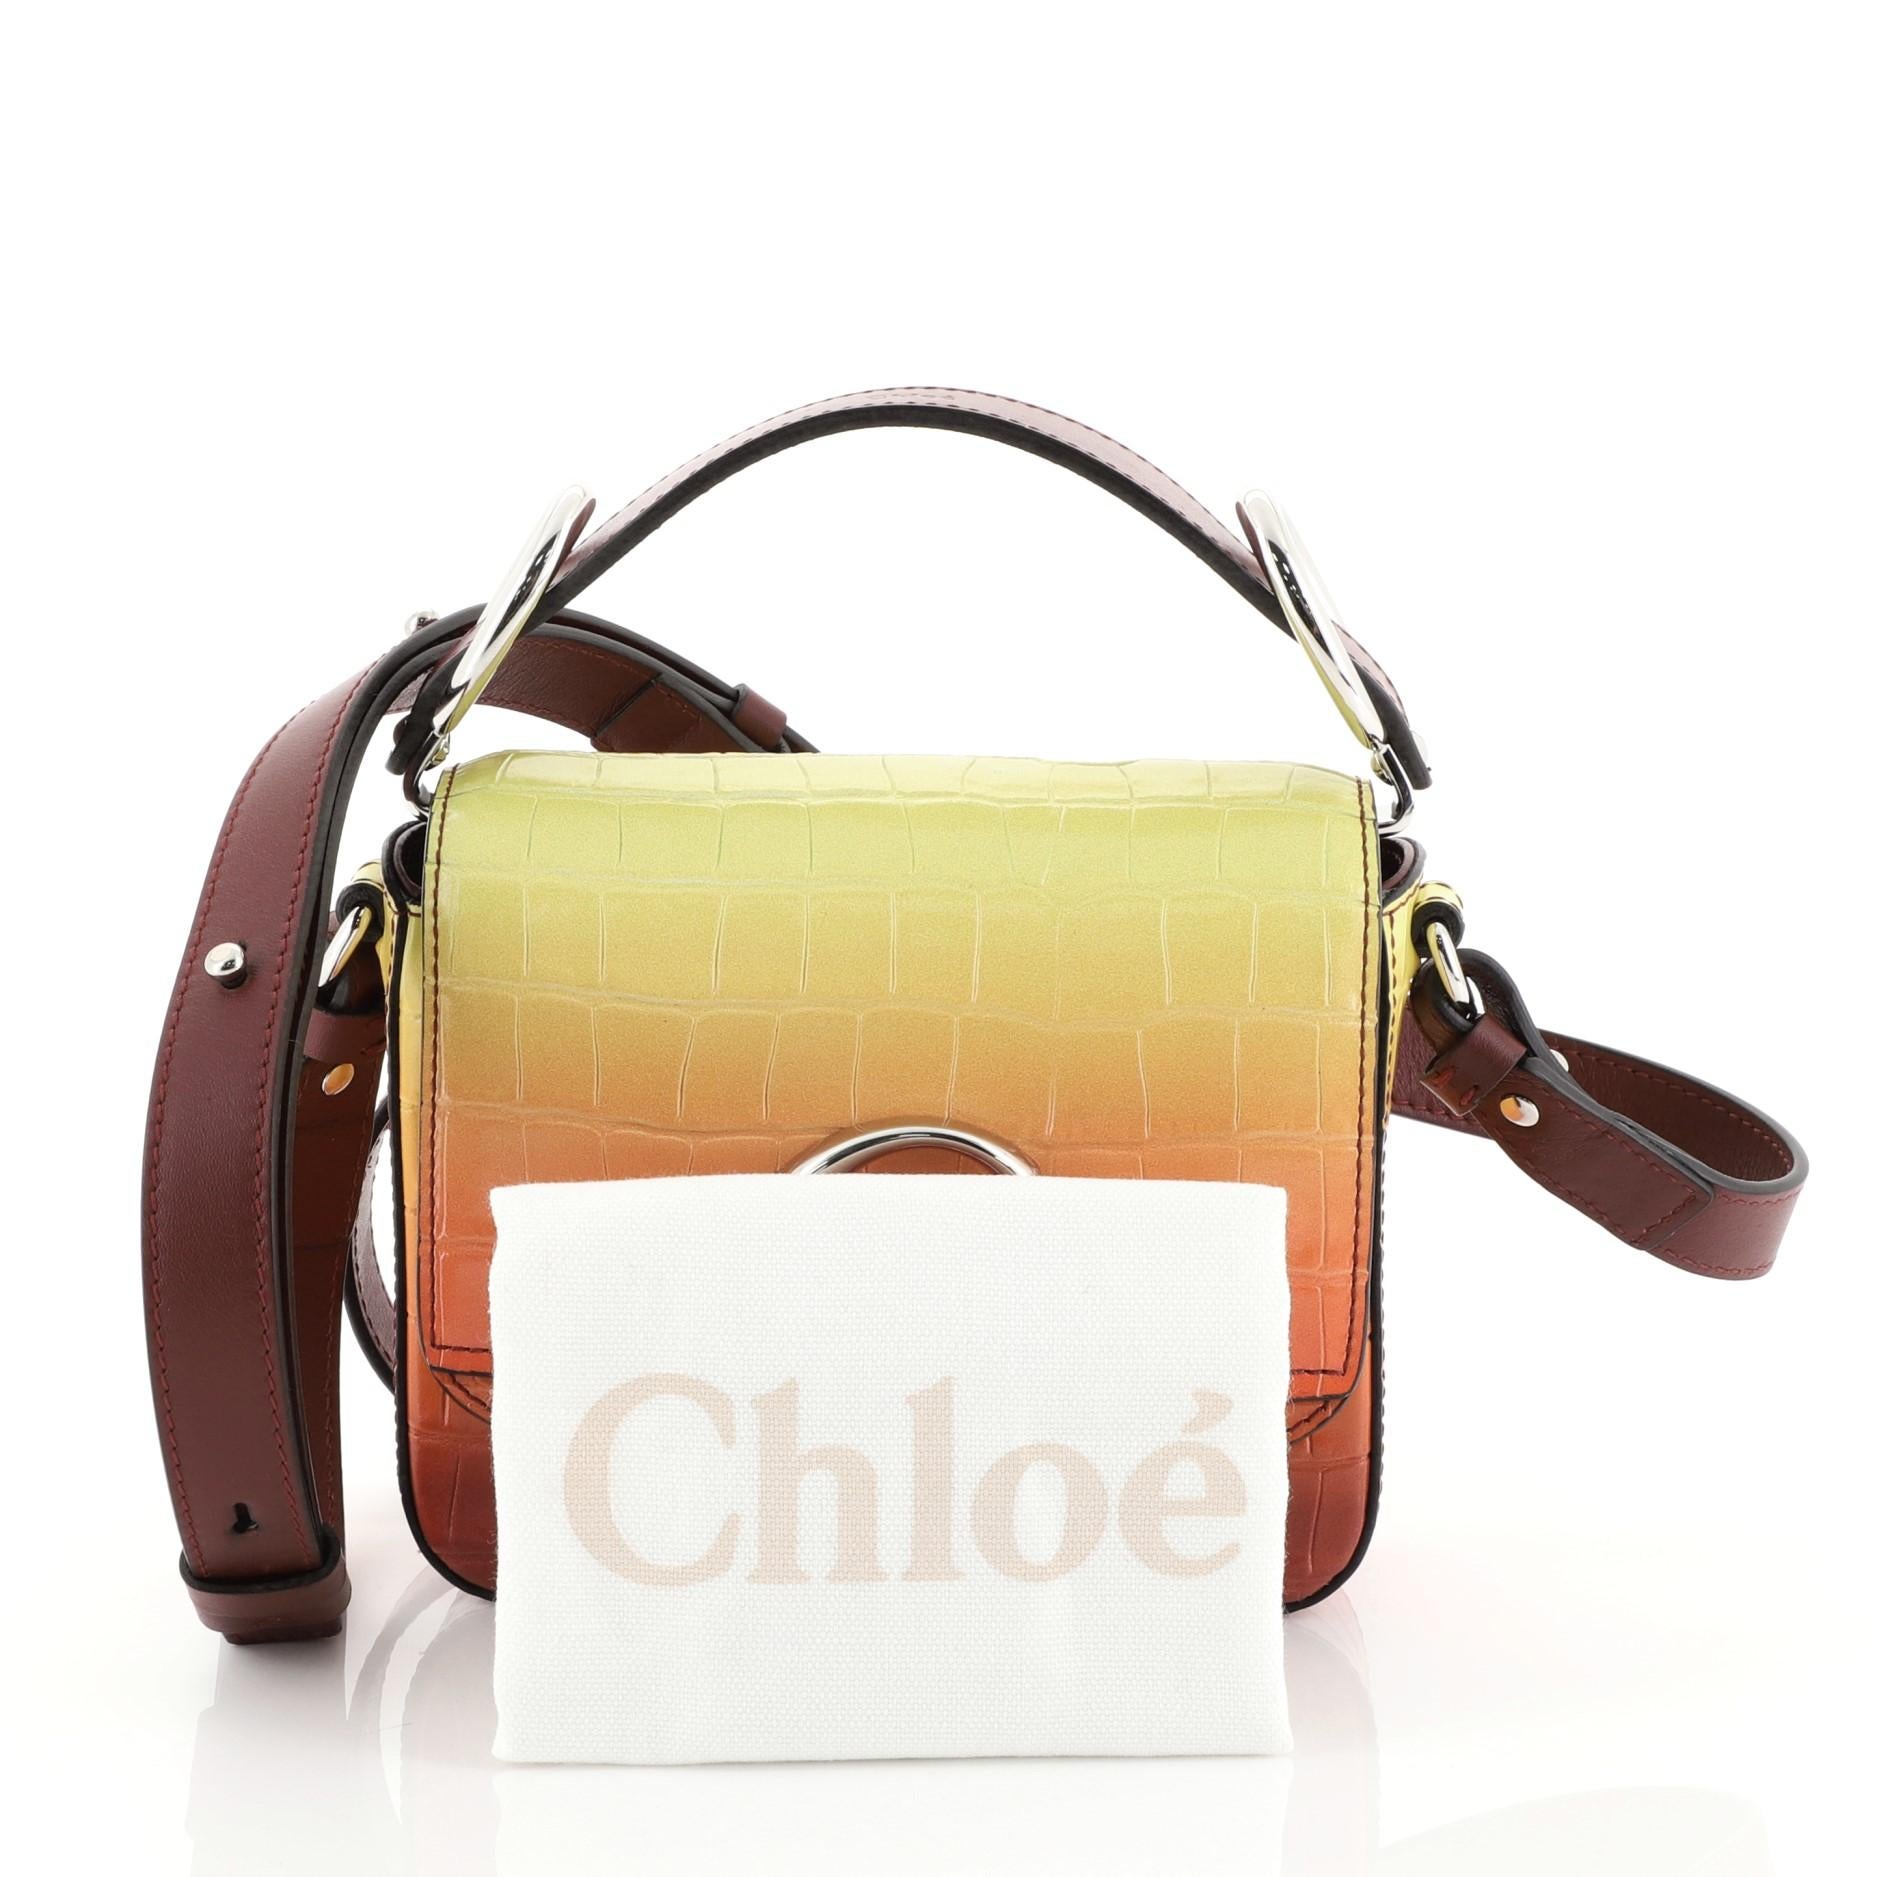 This Chloe C Crossbody Bag Ombre Crocodile Embossed Leather Mini, crafted in multicolor ombre crocodile embossed leather, features an adjustable leather strap, C logo on flap, and silver-tone hardware. Its push-lock closure opens to a neutral fabric